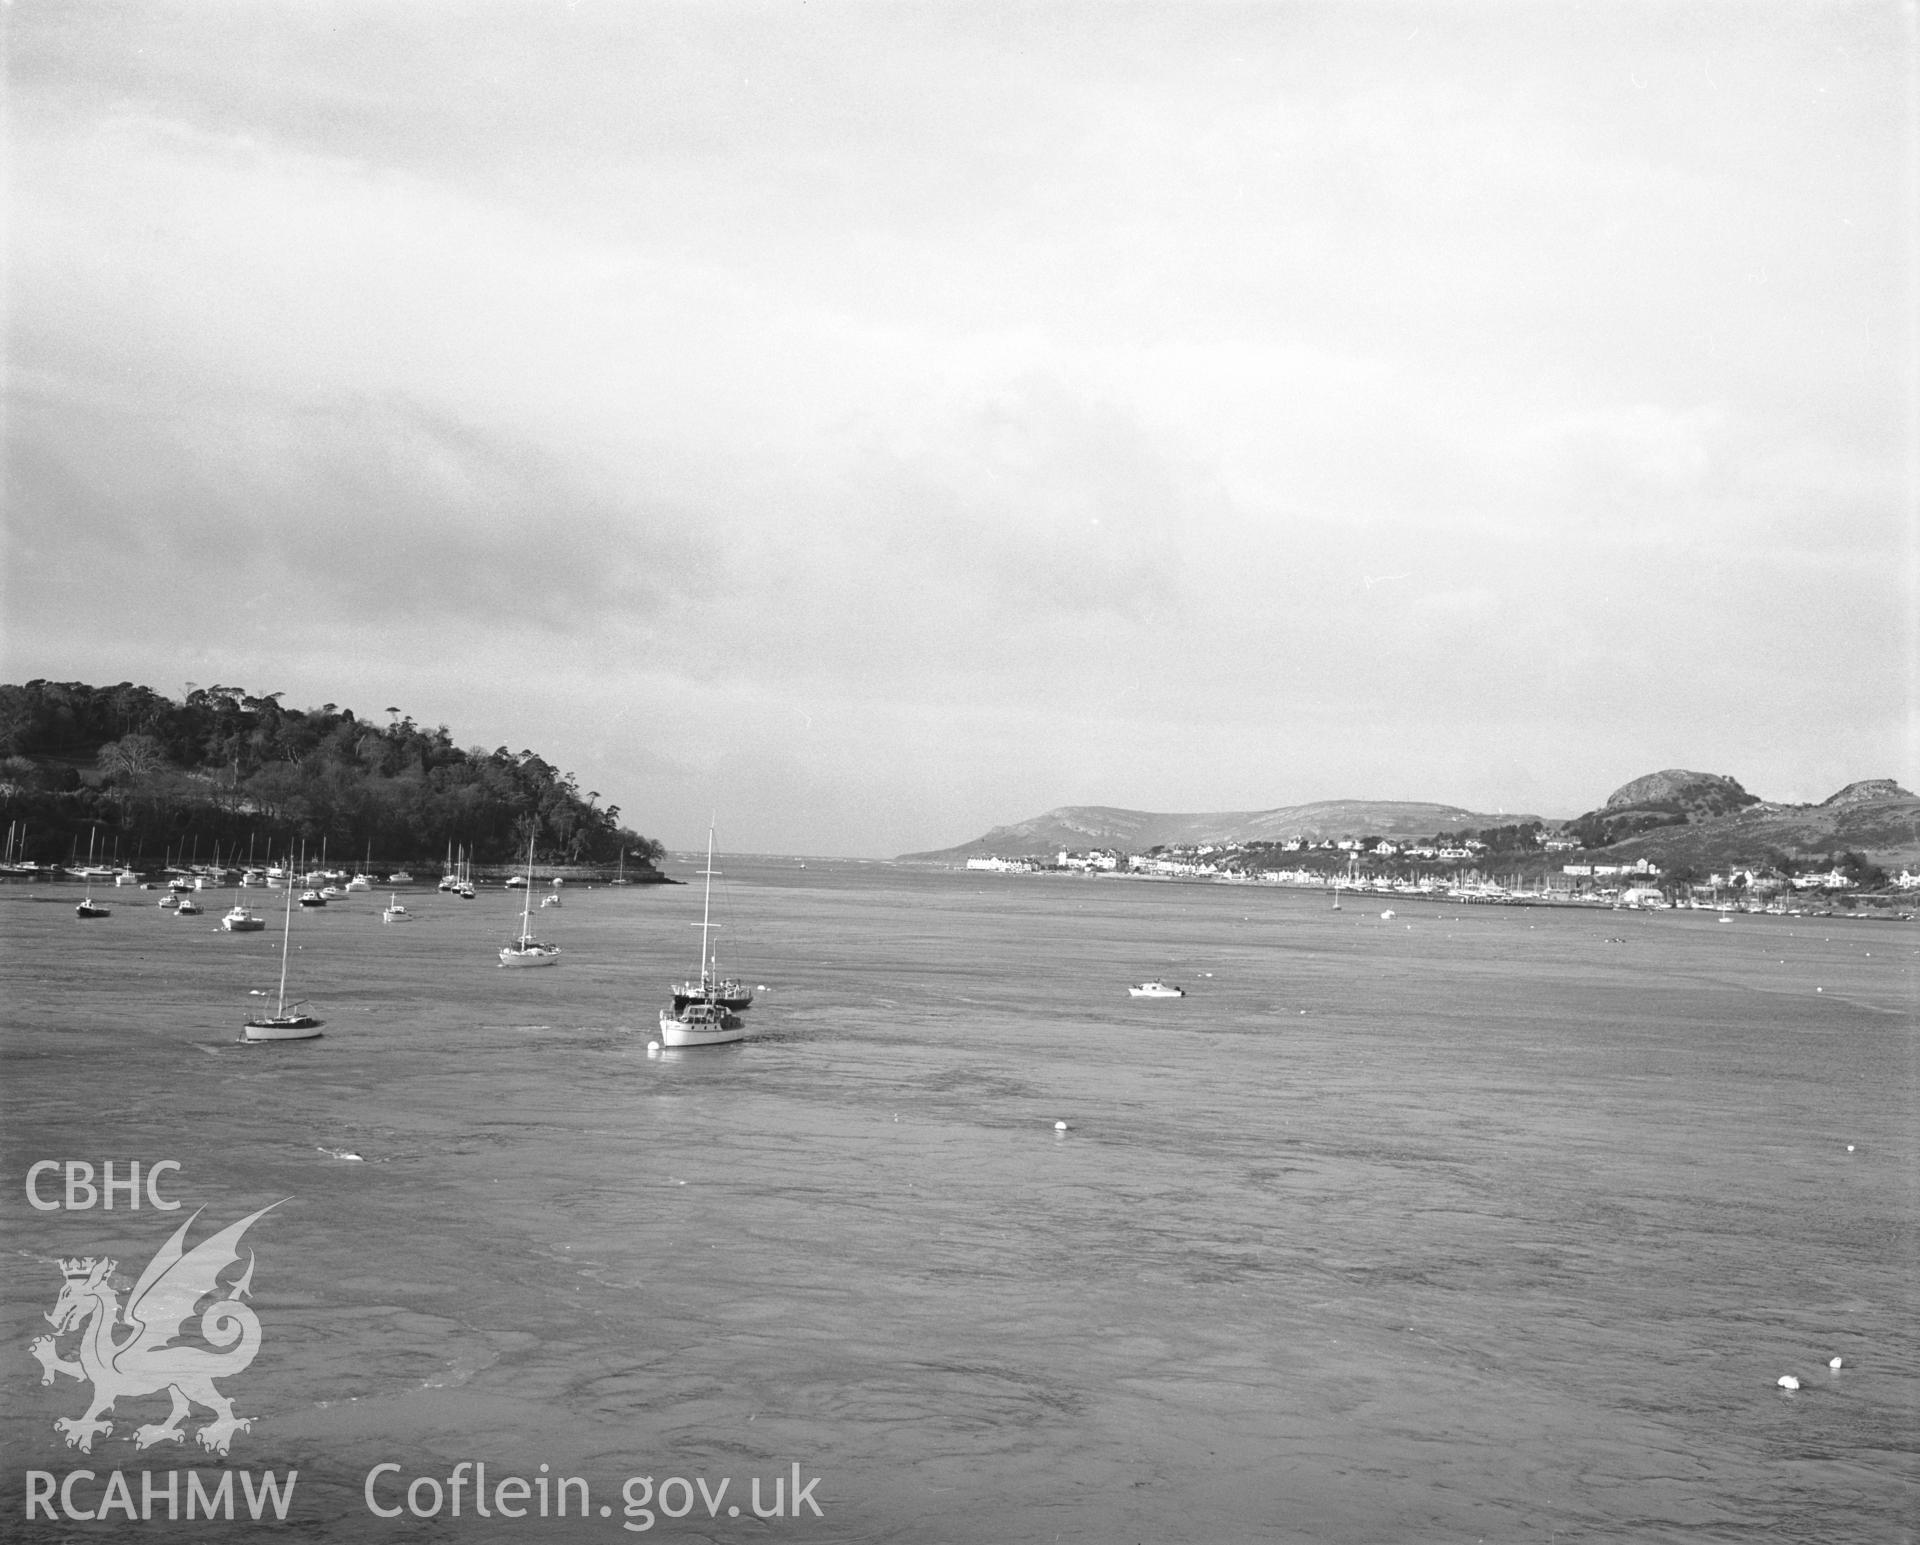 Photographic negative showing distant view of Conwy and surrounding hills from the sea; collated by the former Central Office of Information.